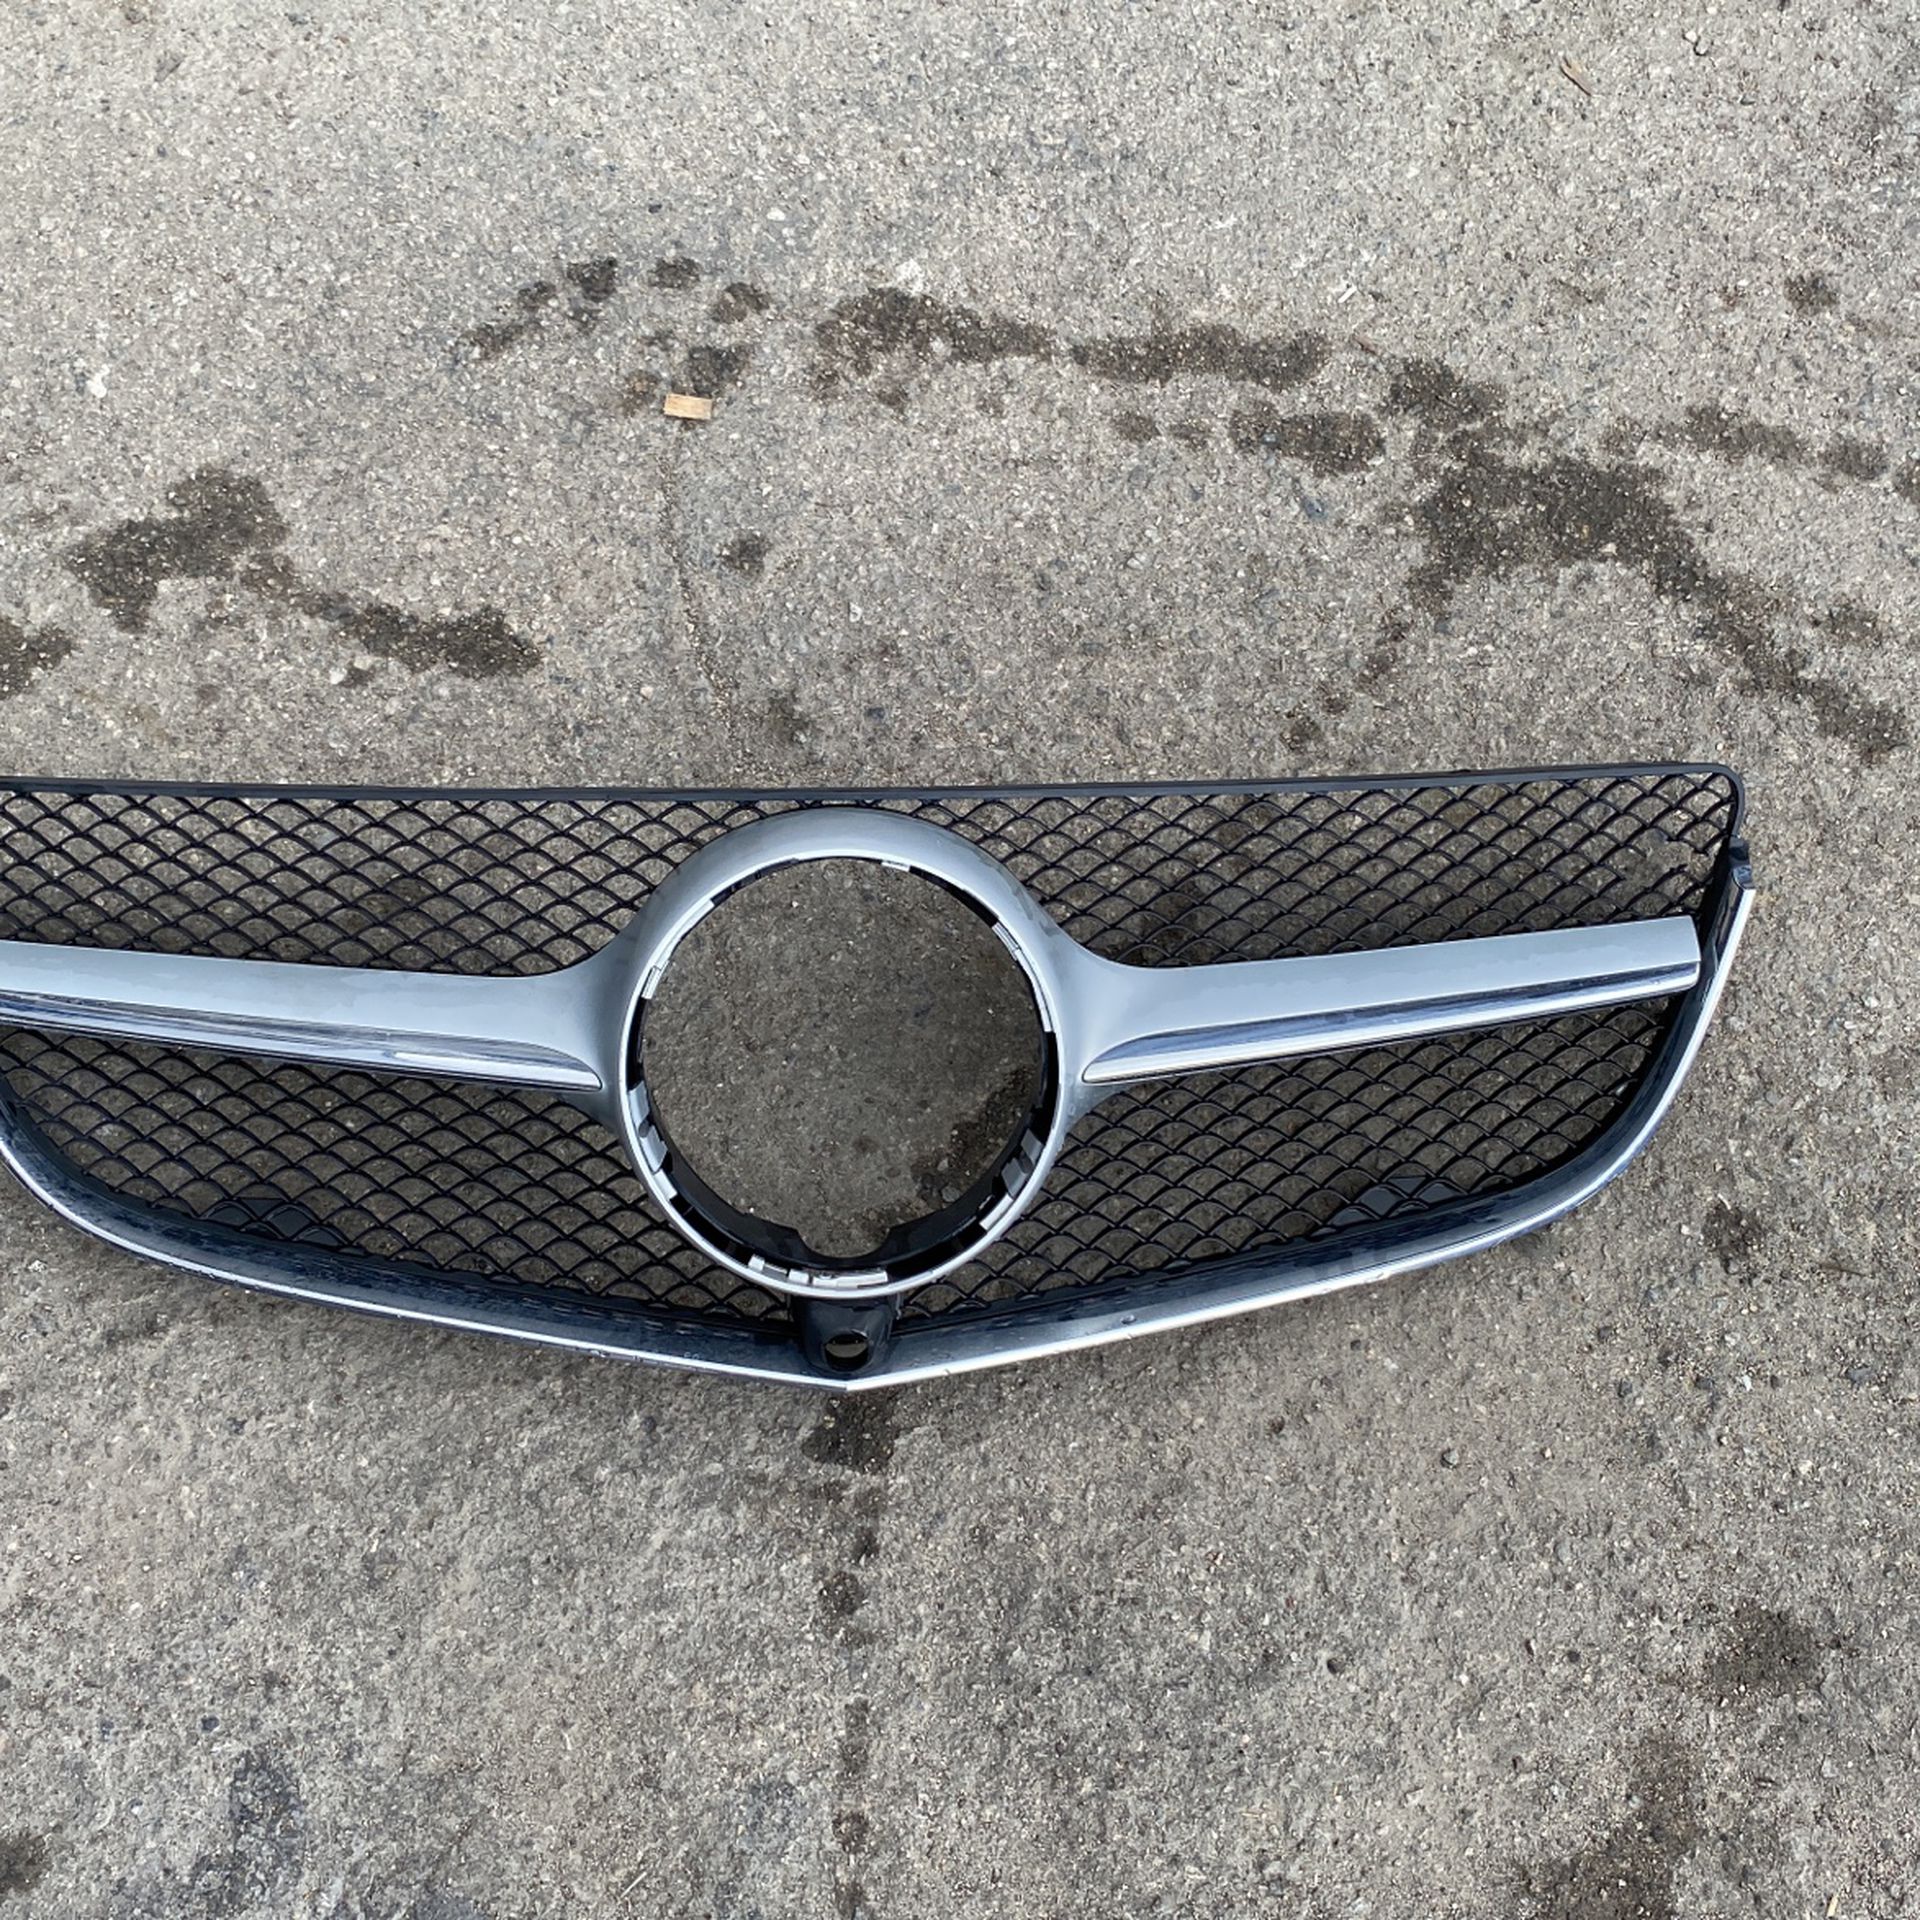 2010-2011-2012-2013 MERCEDES BENZ E CLASS FRONT BUMPER GRILLE A(contact info removed)